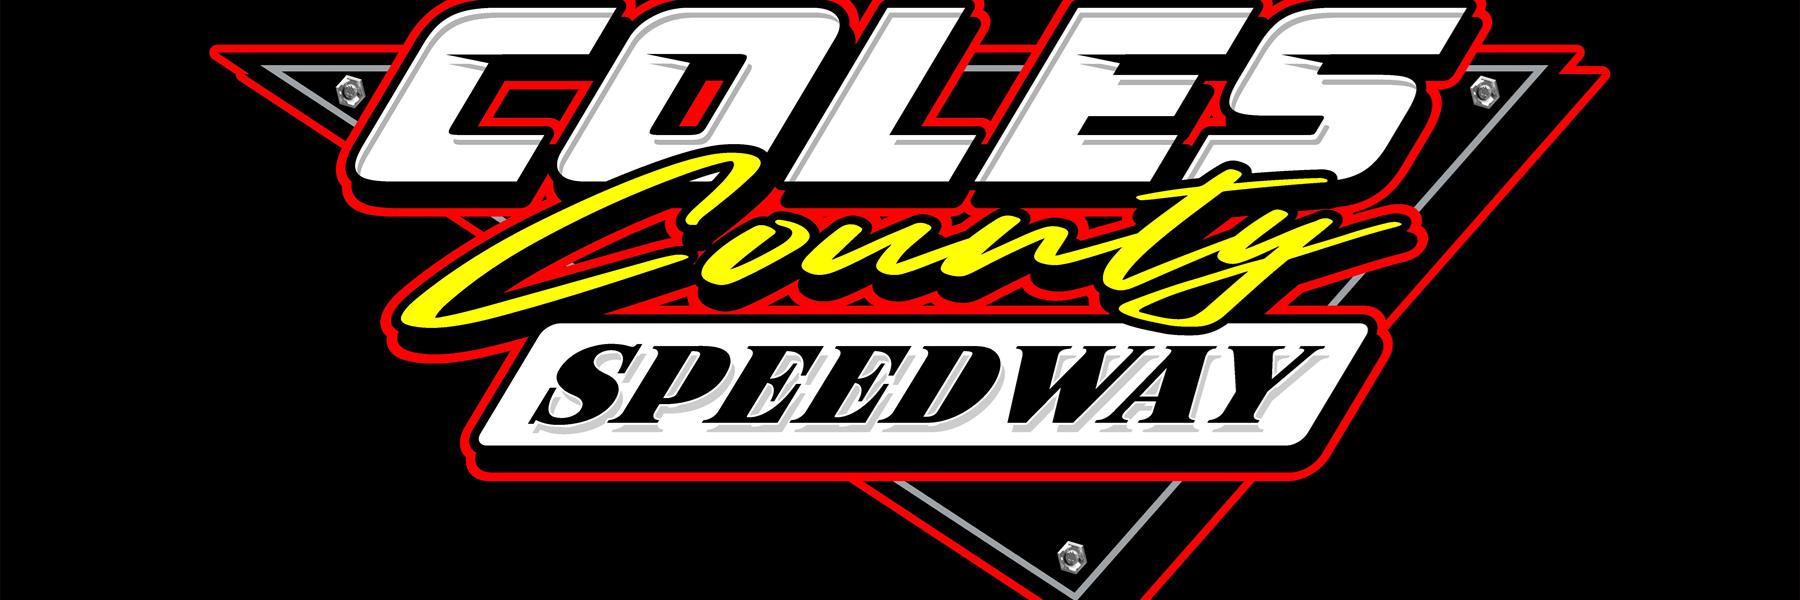 8/26/2023 - Coles County Speedway